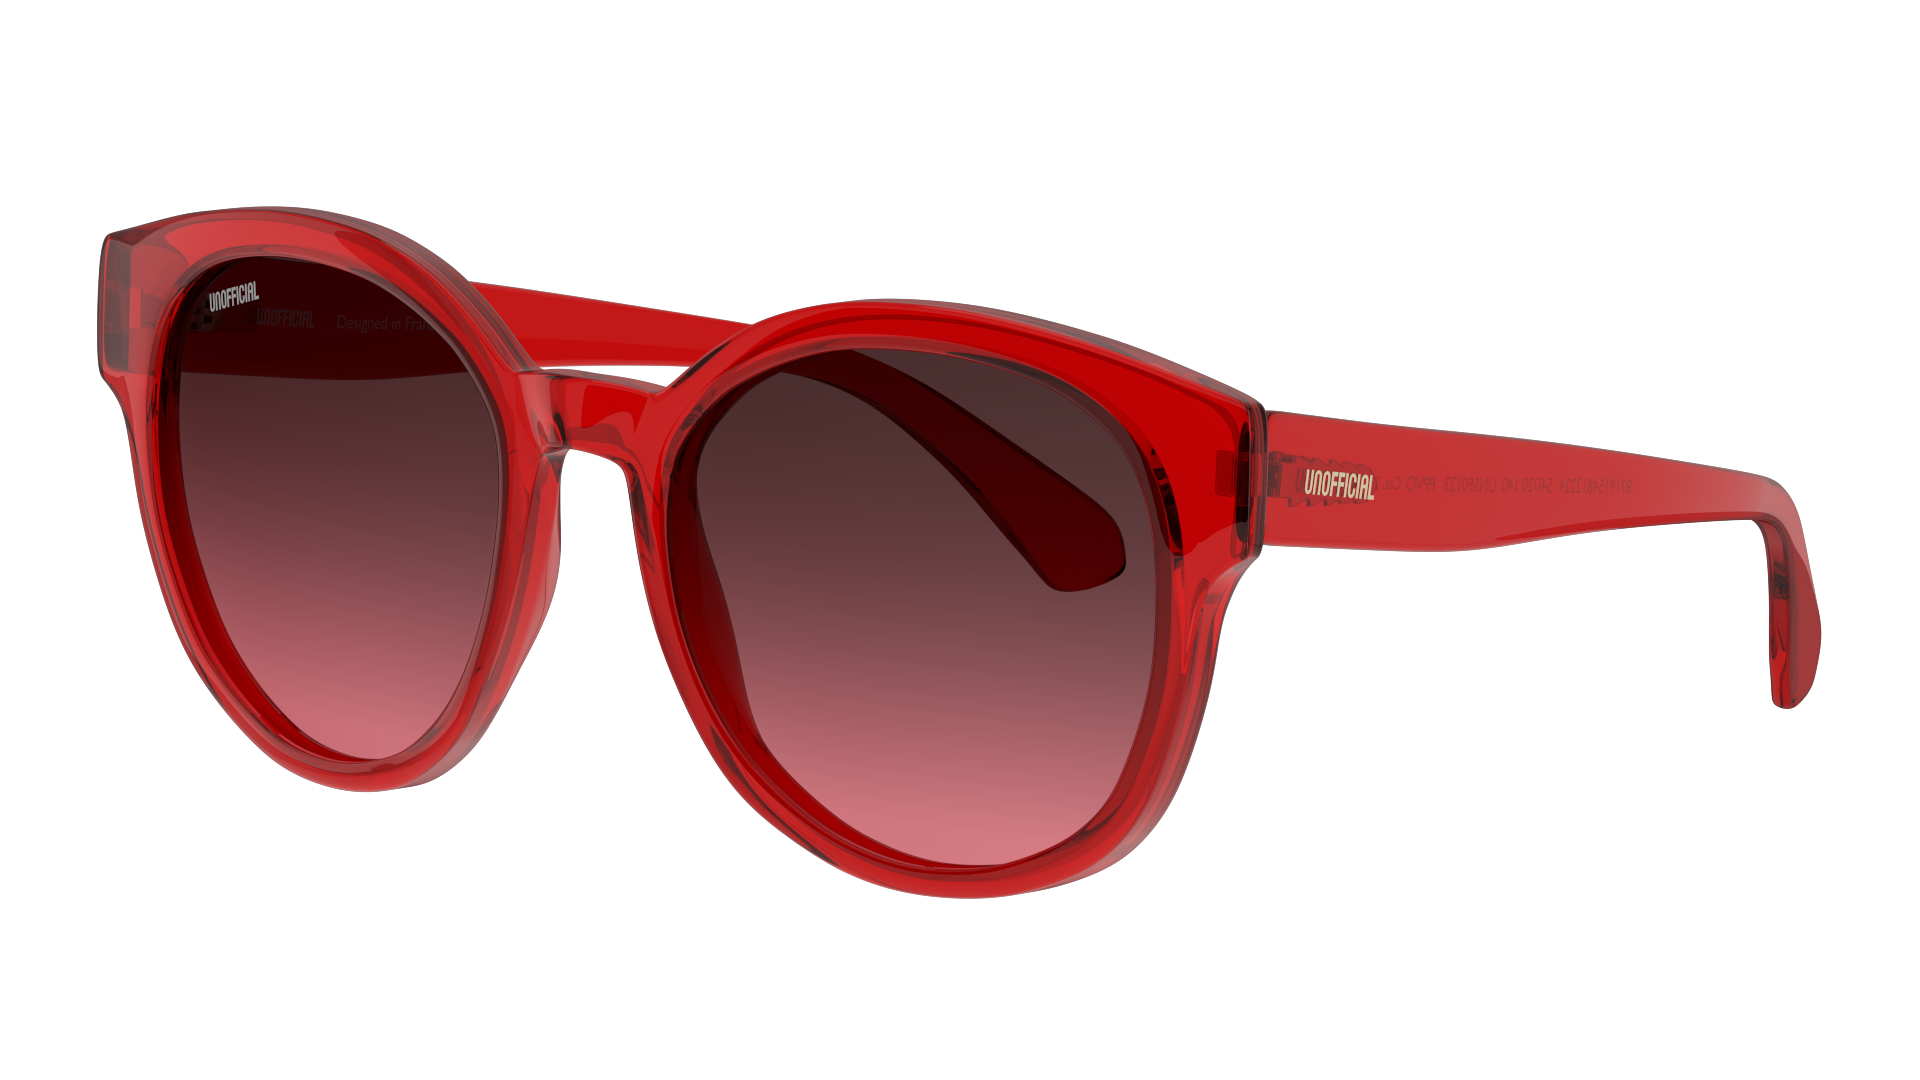 Angle_Left01 Unofficial UNSF0123 (PPV0) Sunglasses Violet / Transparent, Red